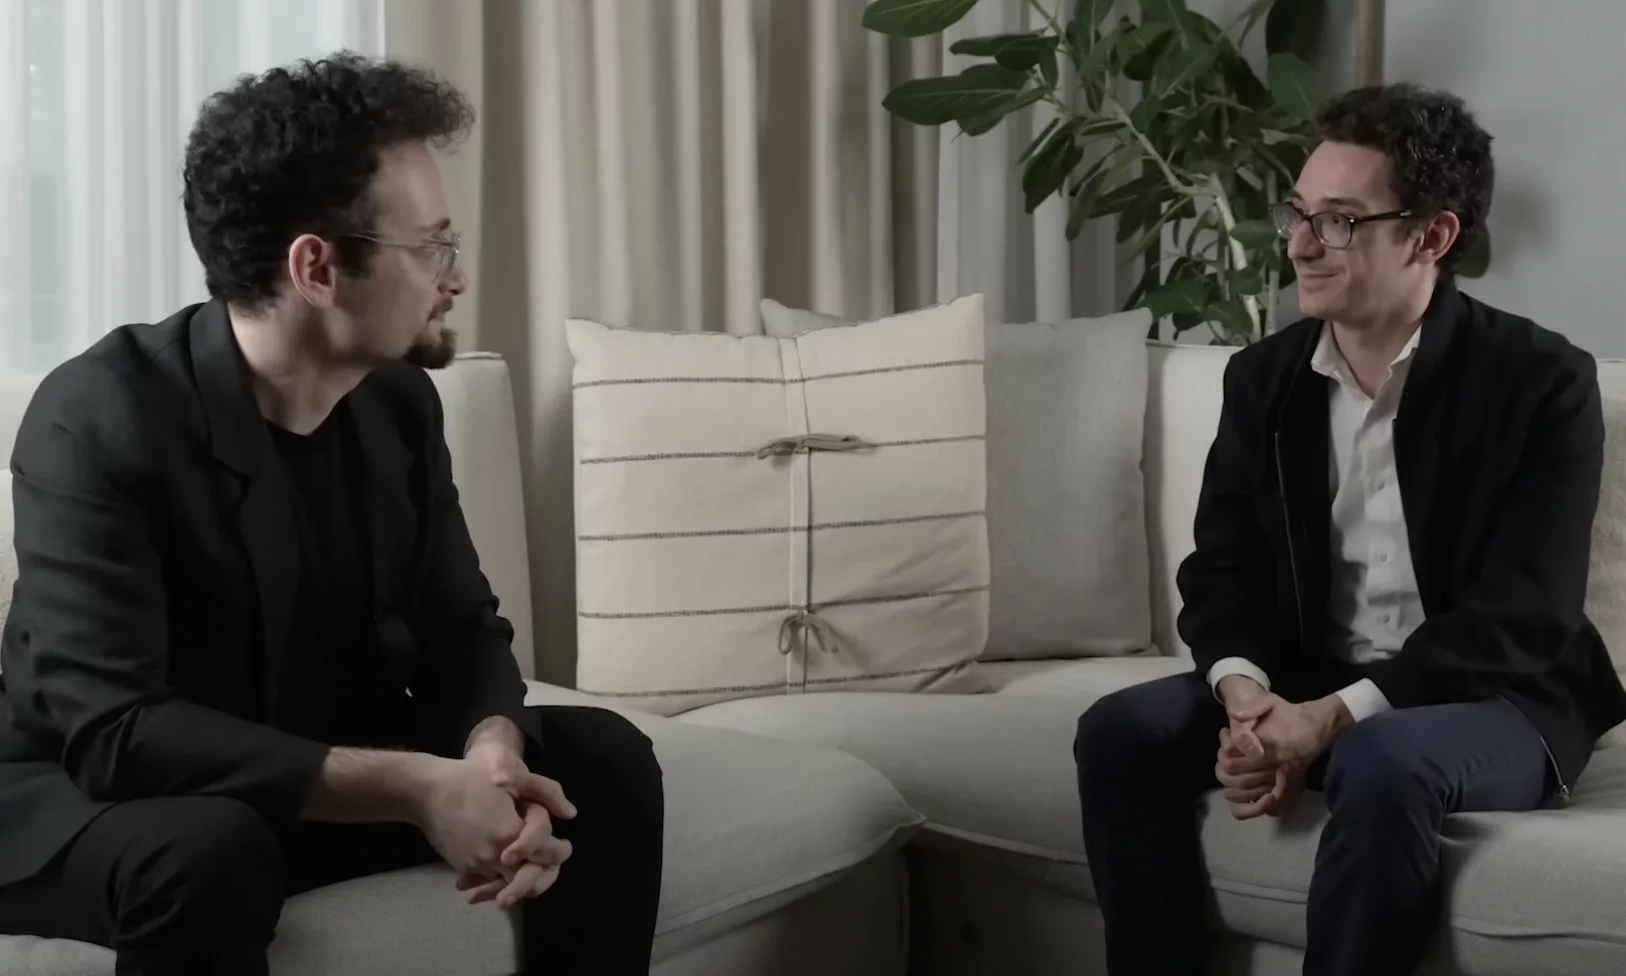 Fabiano Caruana and Levy Rozman during an interview